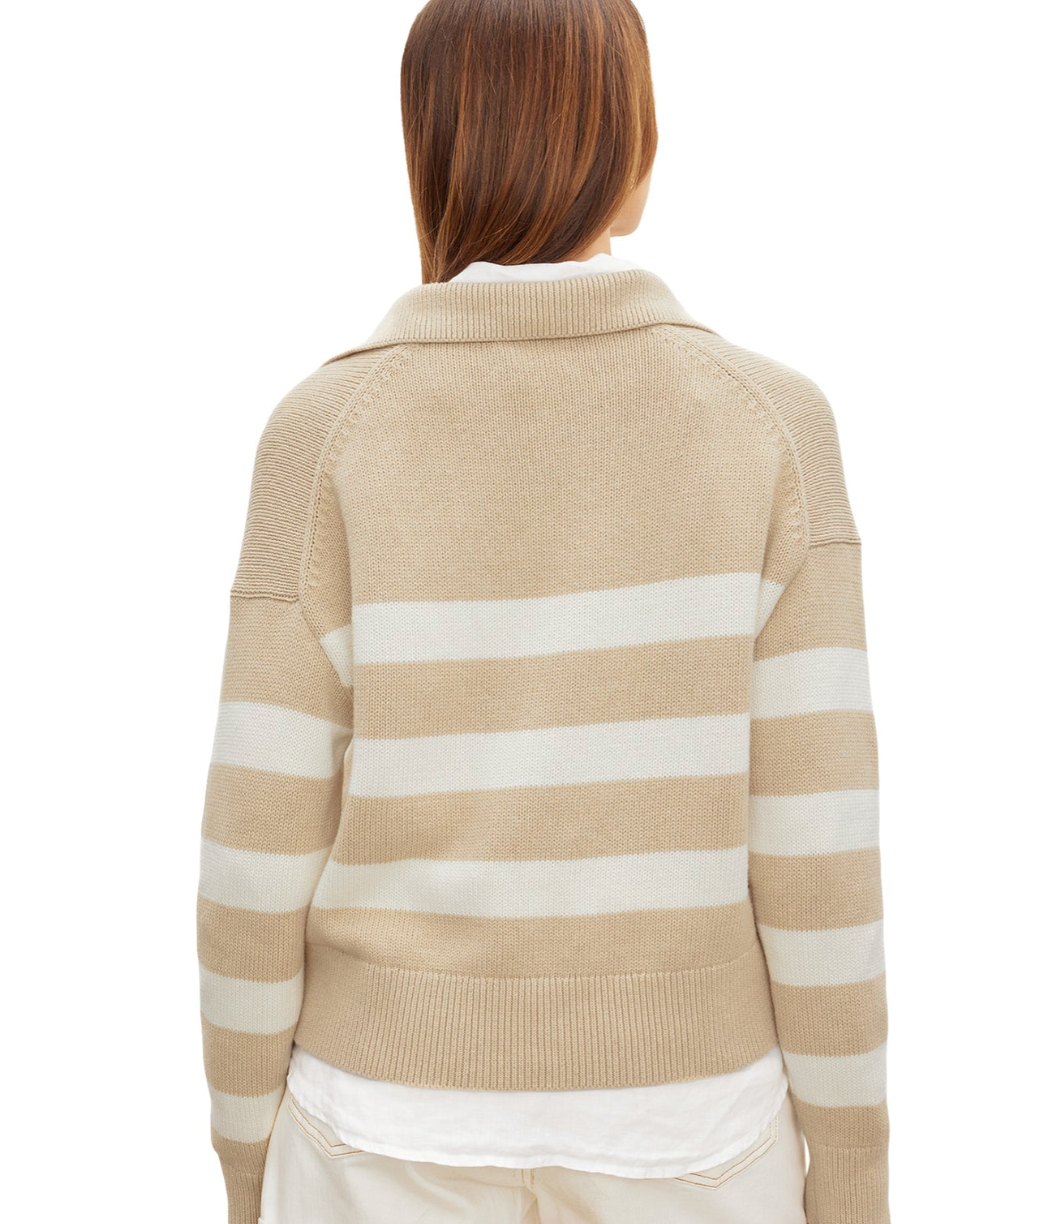 The LUCIE Knit